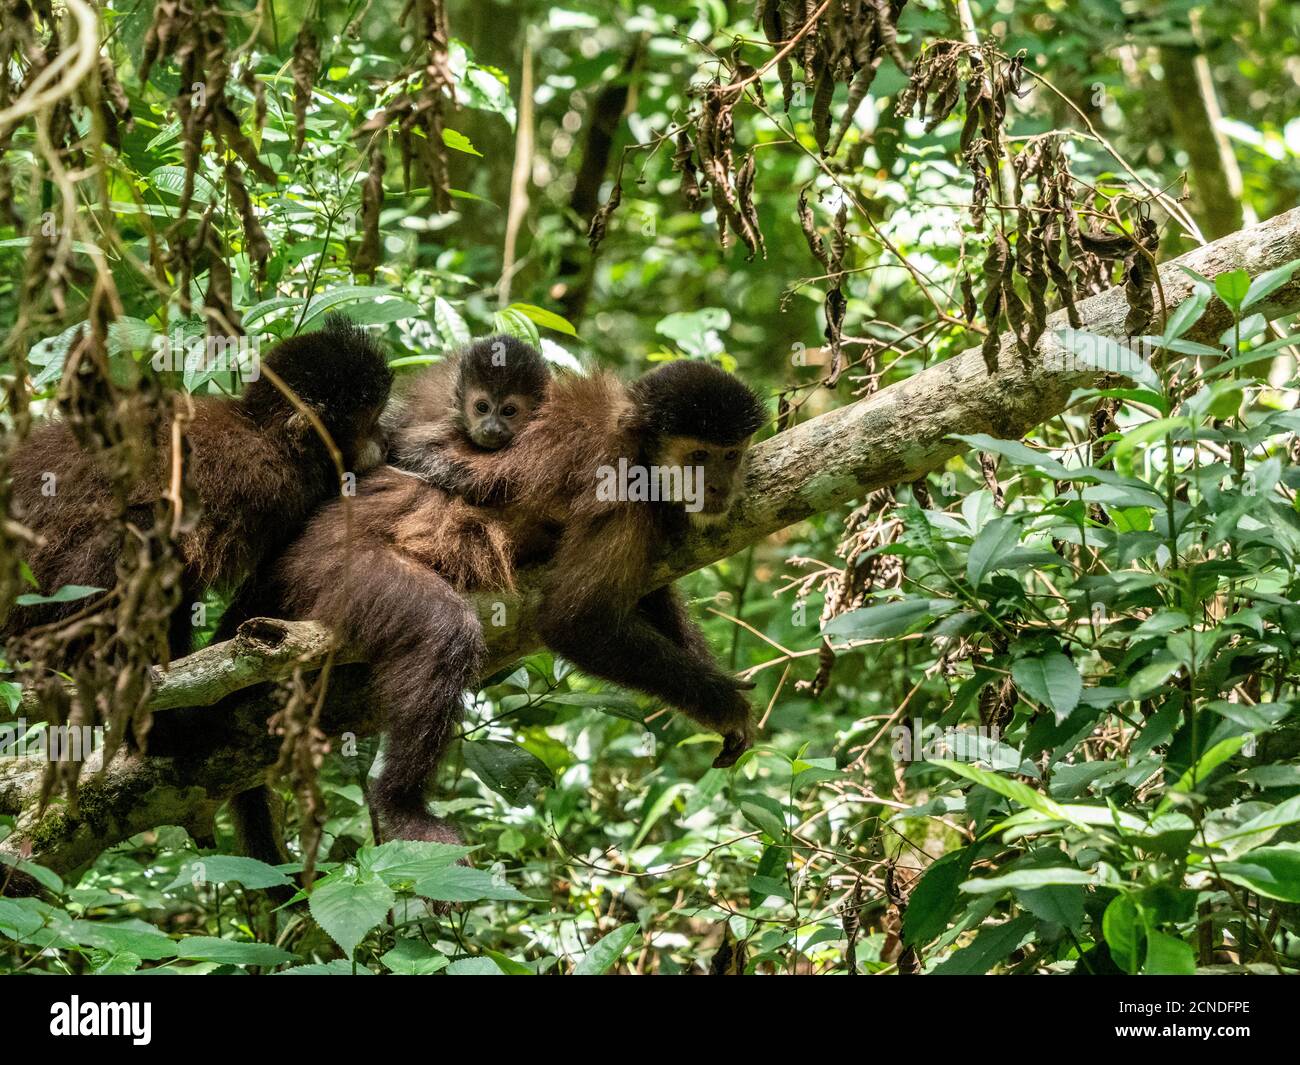 An adult black capuchin monkey (Sapajus nigritus) with youngster on its back at Iguacu Falls, Misiones Province, Argentina Stock Photo